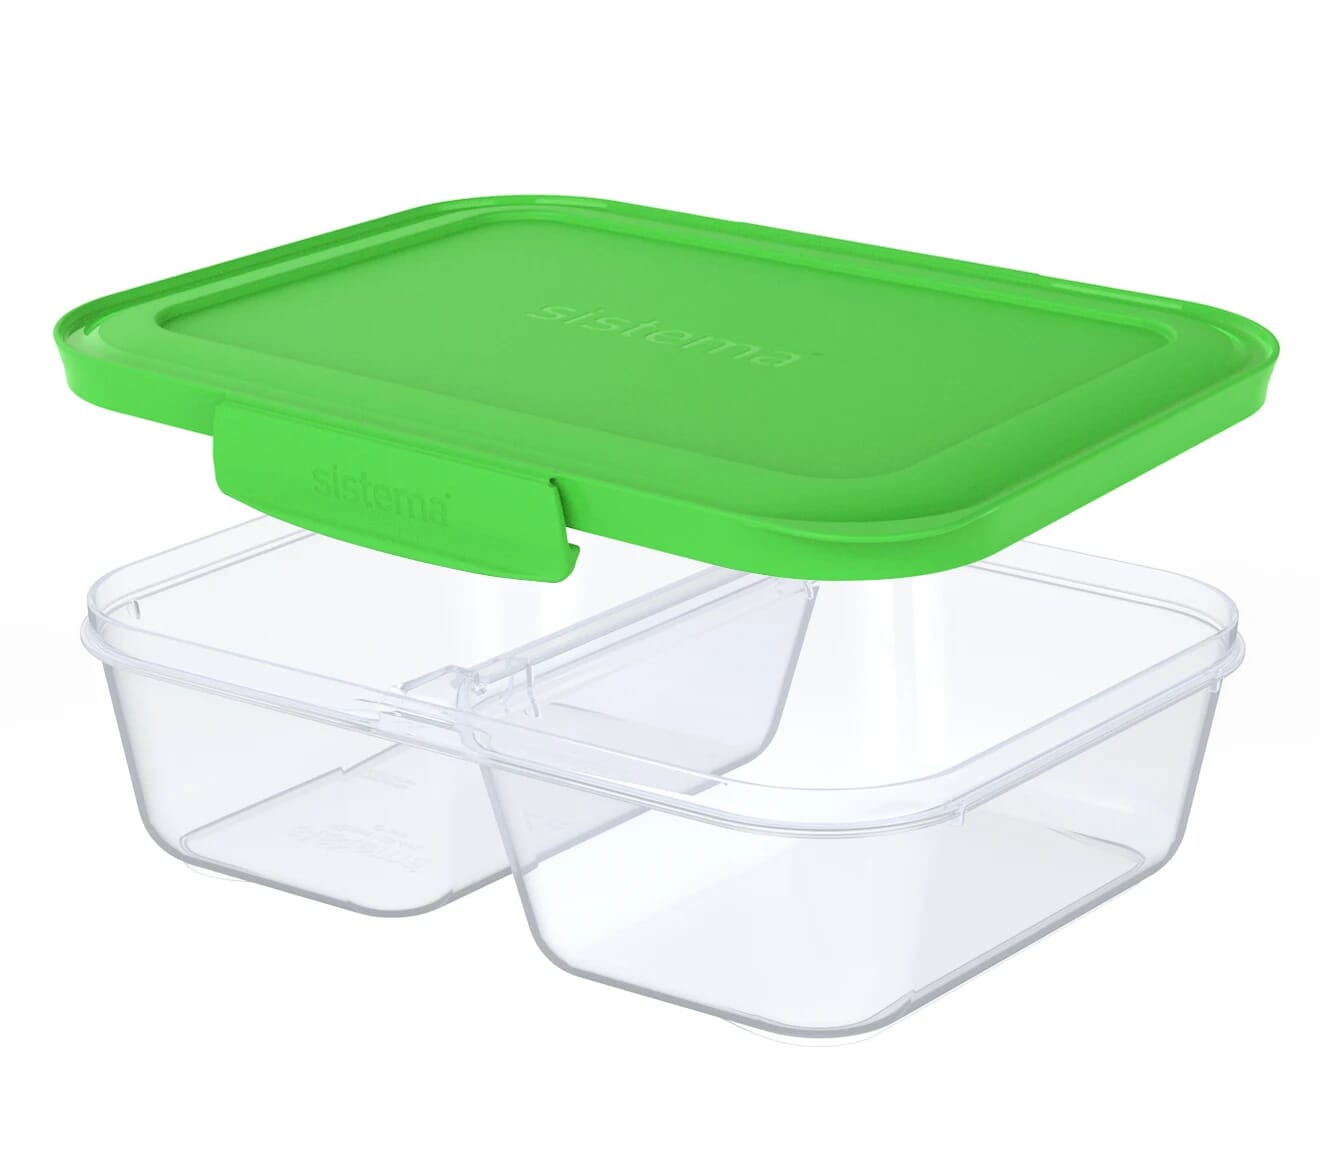 Meal Prep with Sistema To Go Containers •